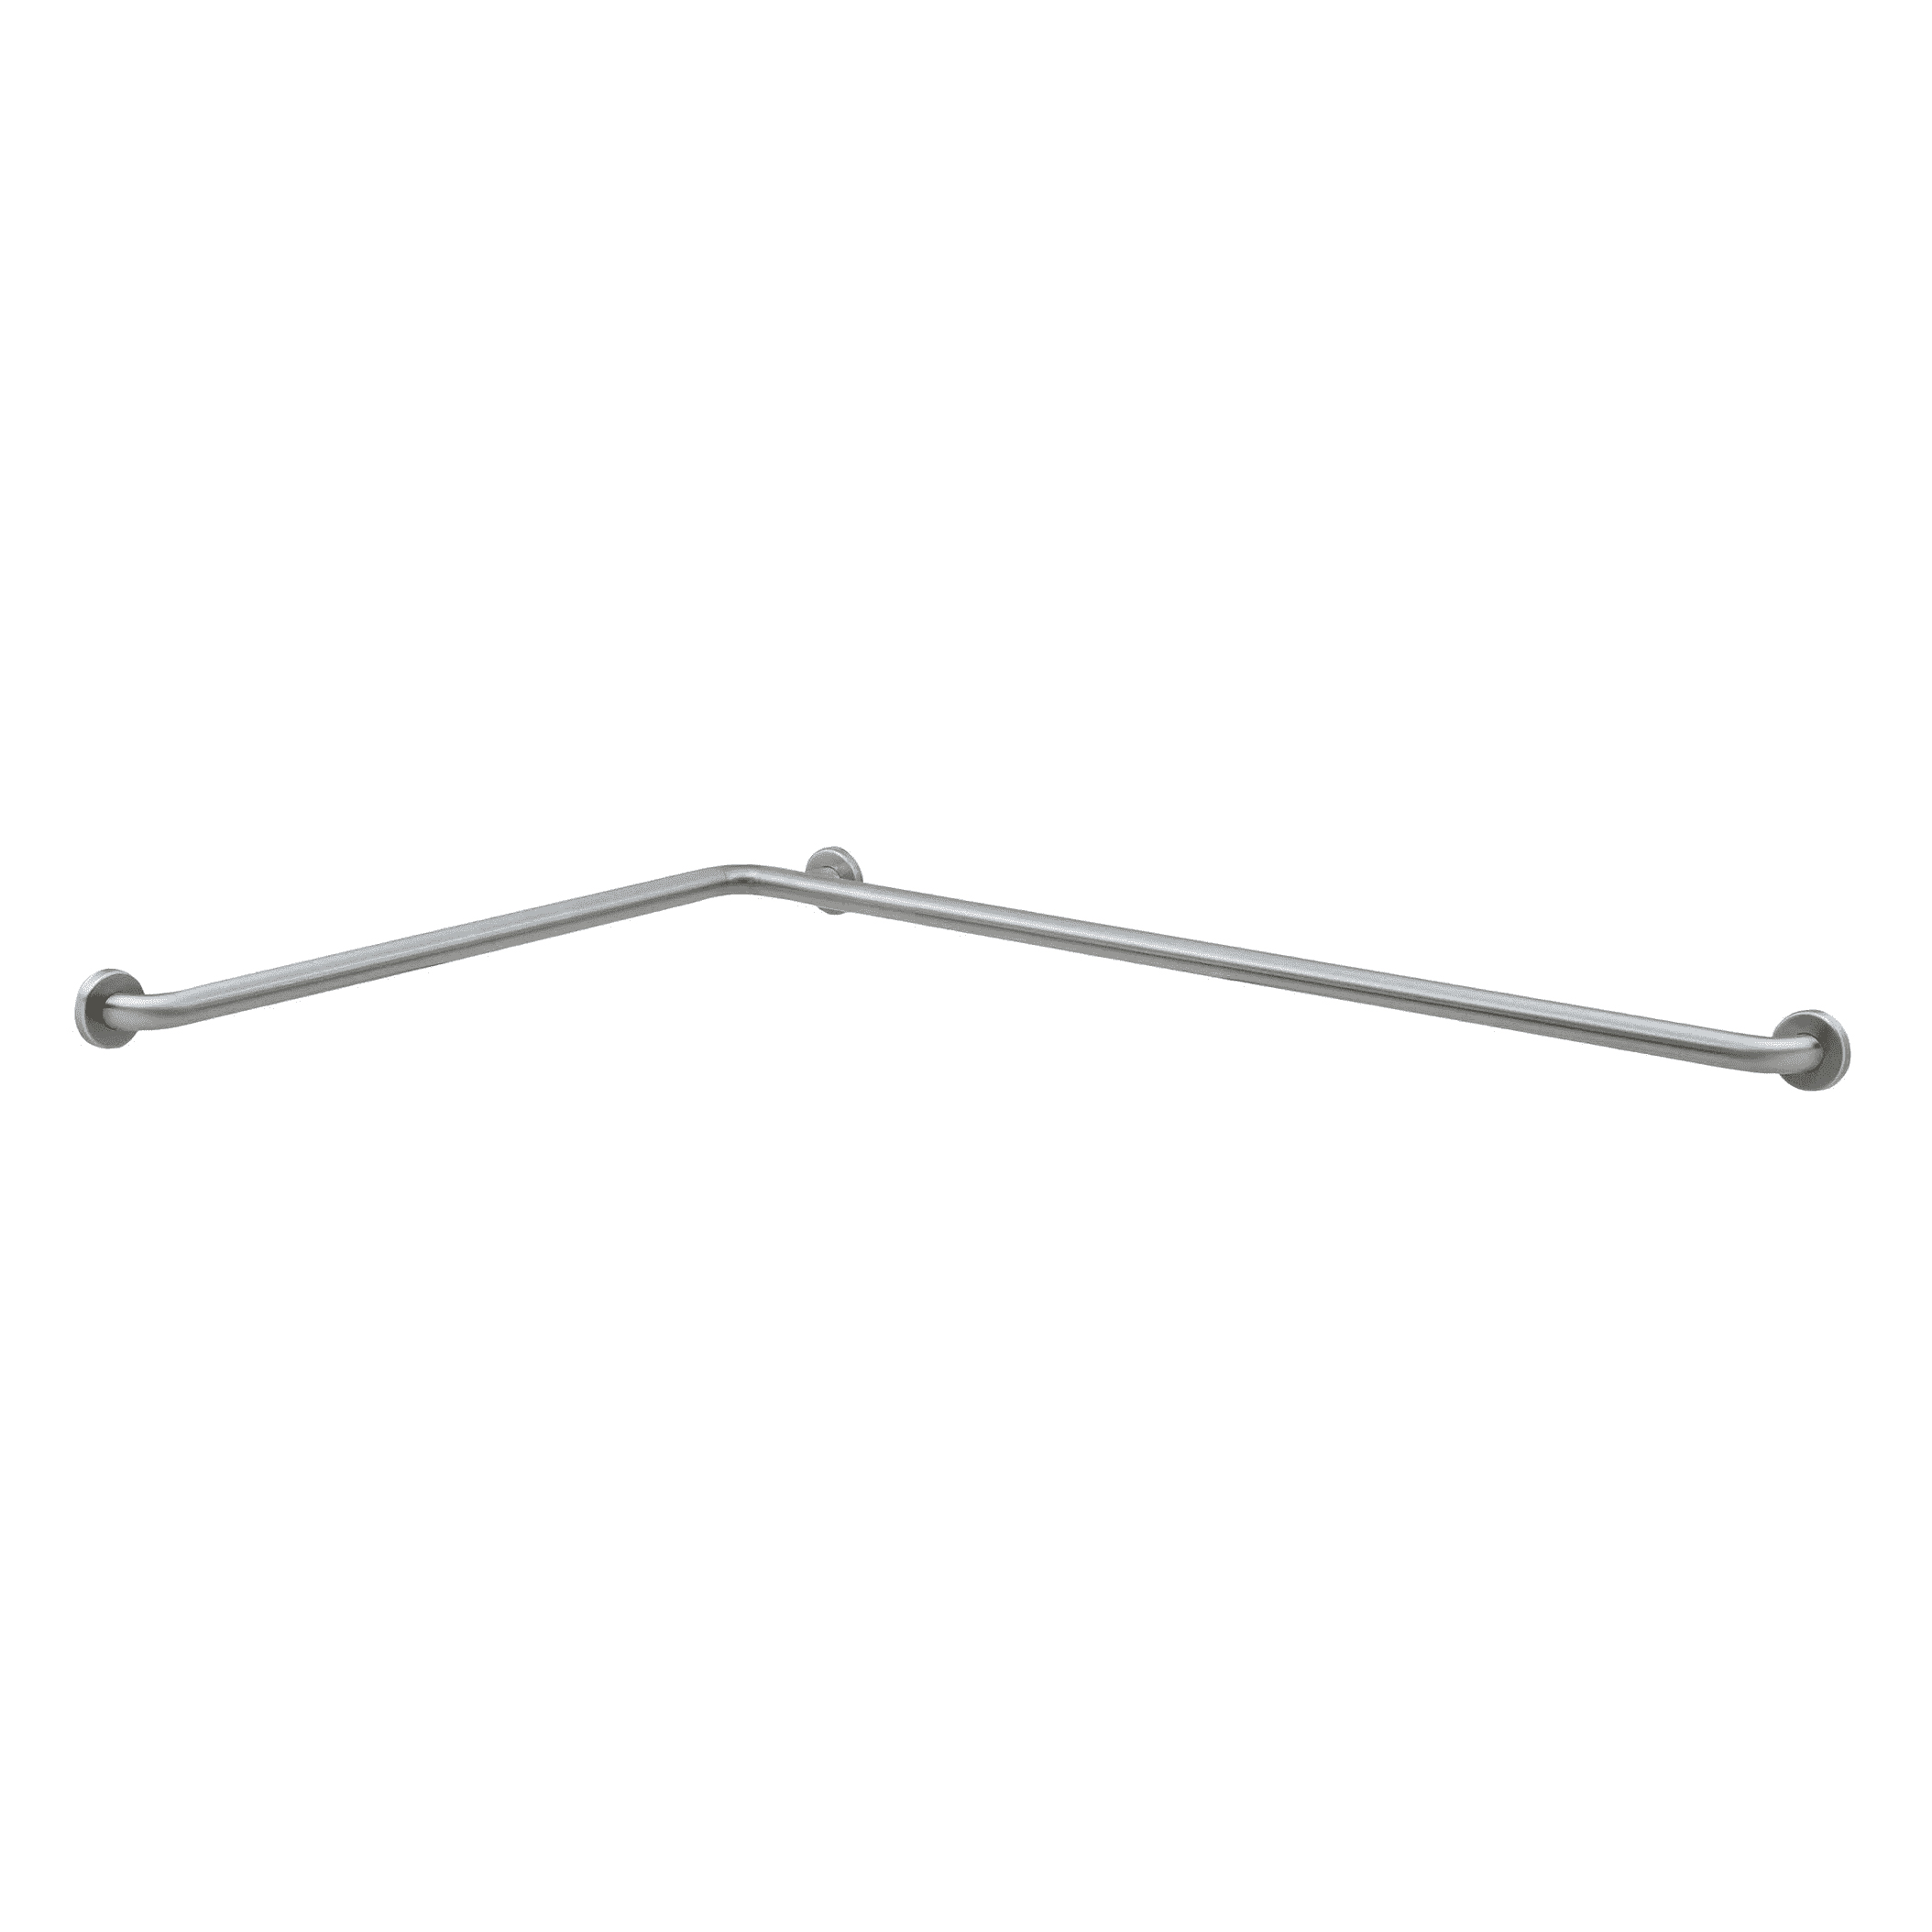 Two-Wall 36 x 54" Grab Bar In Peened Stainless